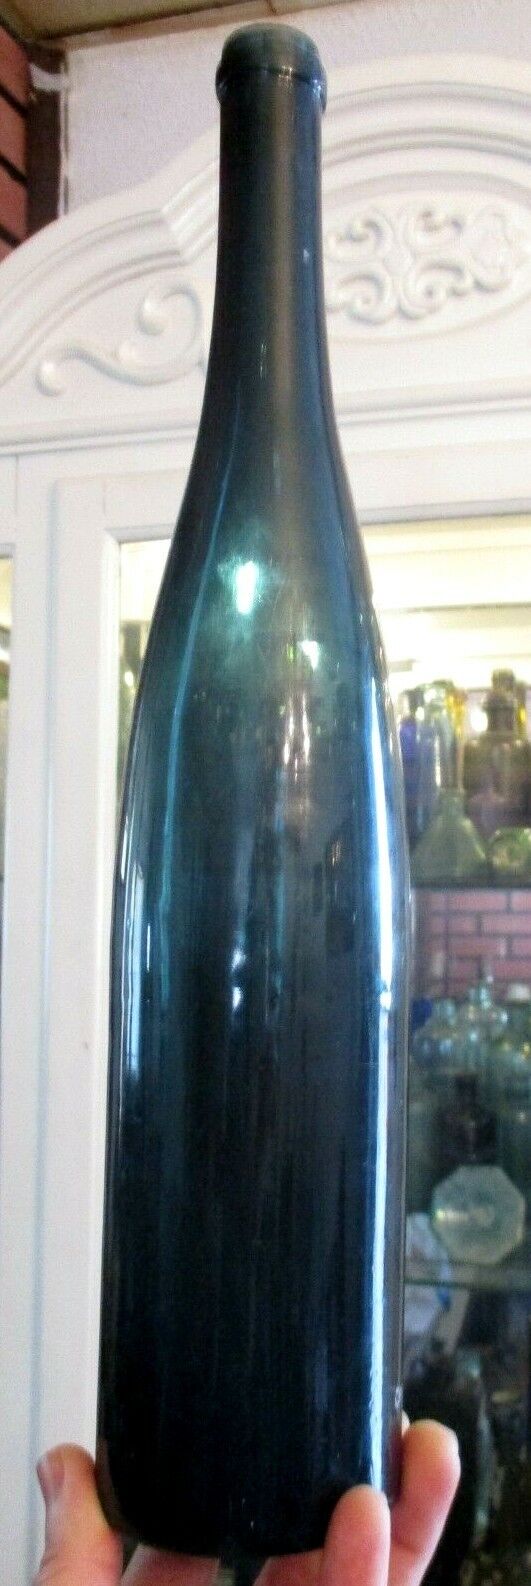 NICE DARK TEAL COLORED HOCK WINE BOTTLE 15 INCHES TALL 1880\'S ERA L@@K